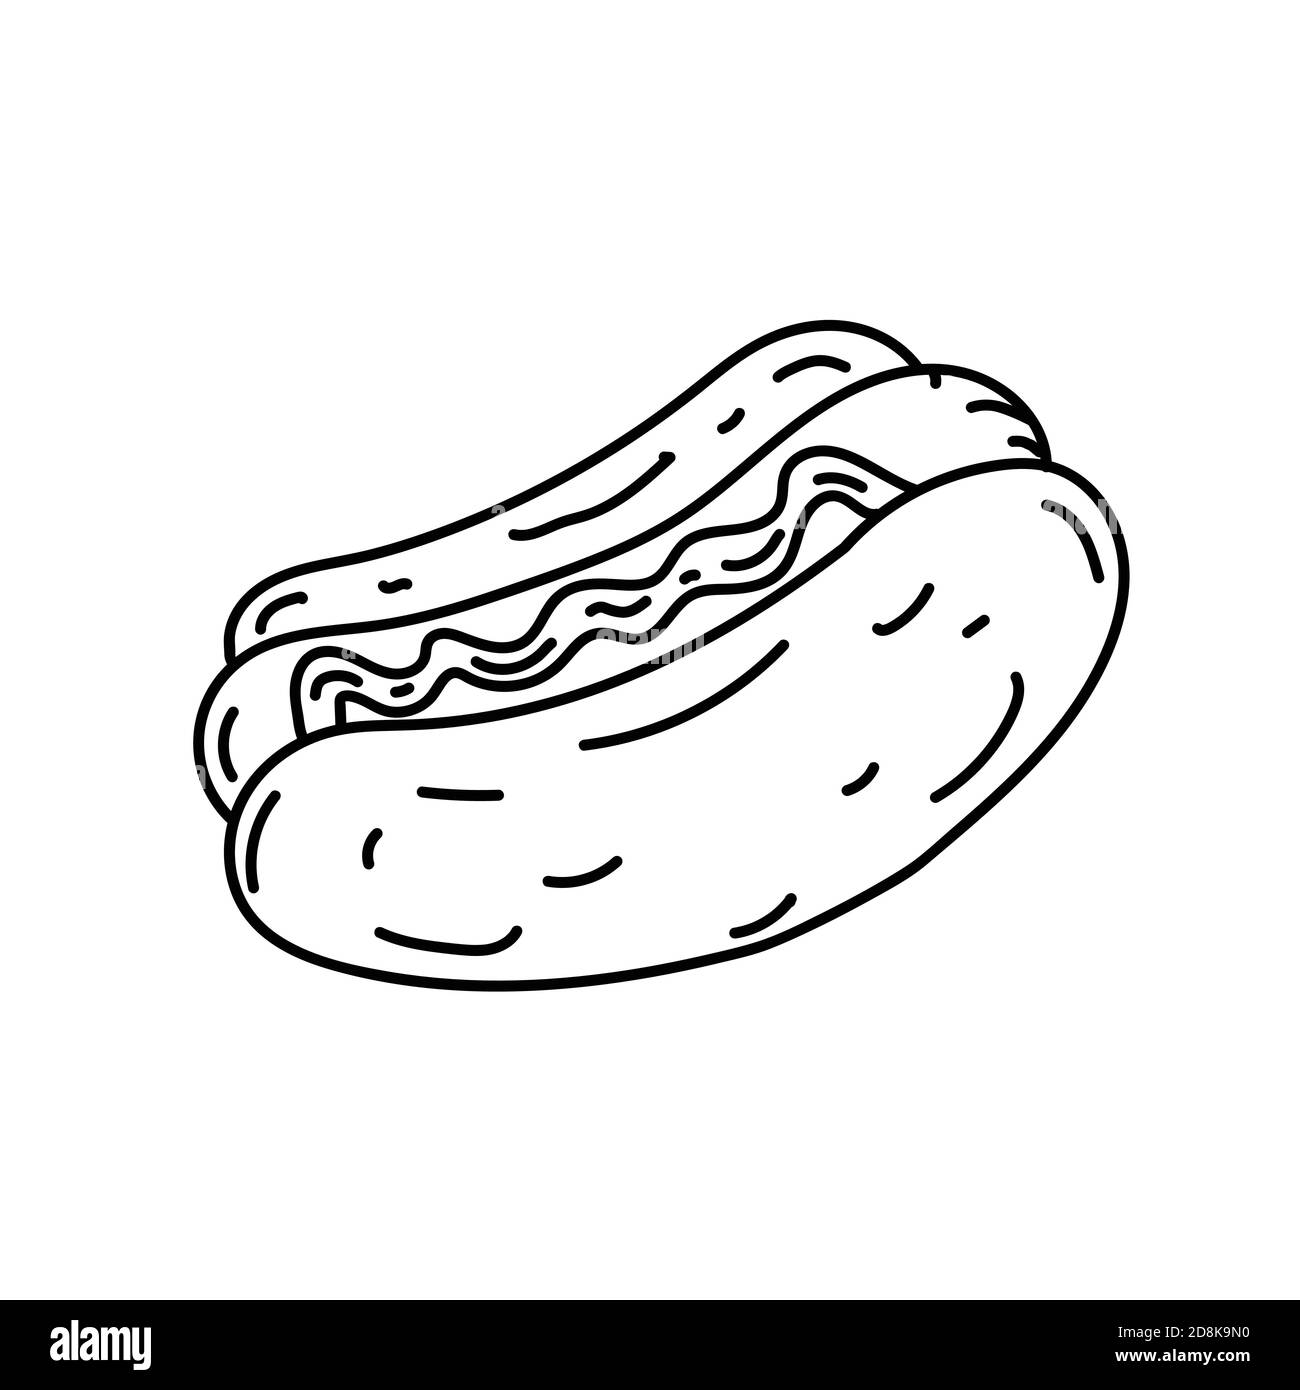 Hotdog Icon. Doodle Hand Drawn or Black Outline Icon Style Stock Vector